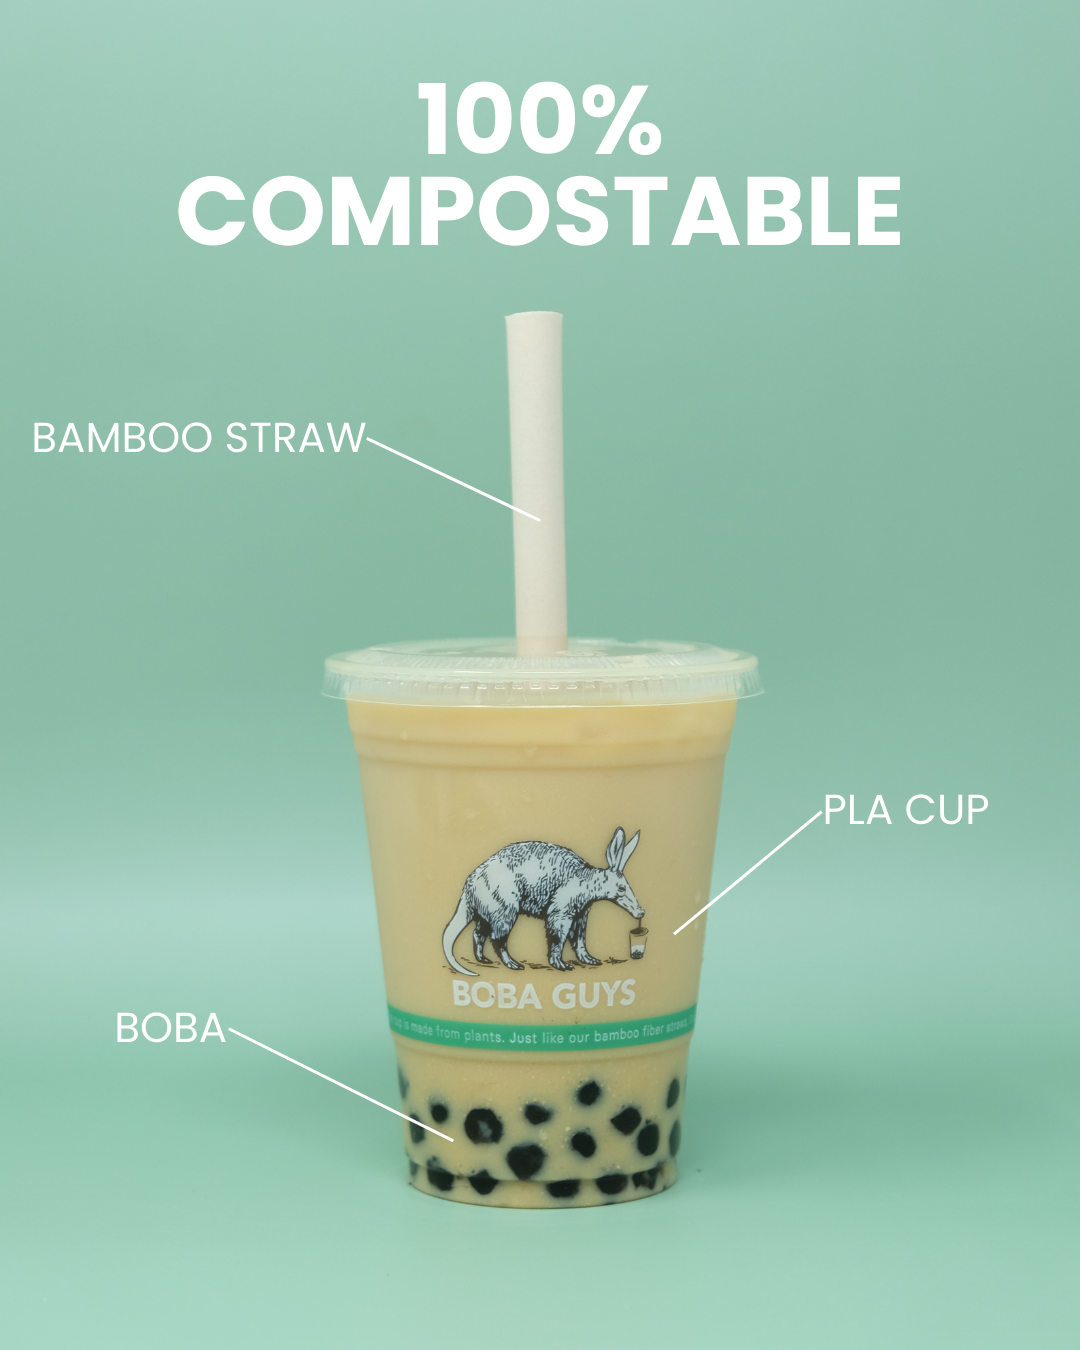 PLA — Boba Guys - Serving the highest quality bubble milk tea in the world